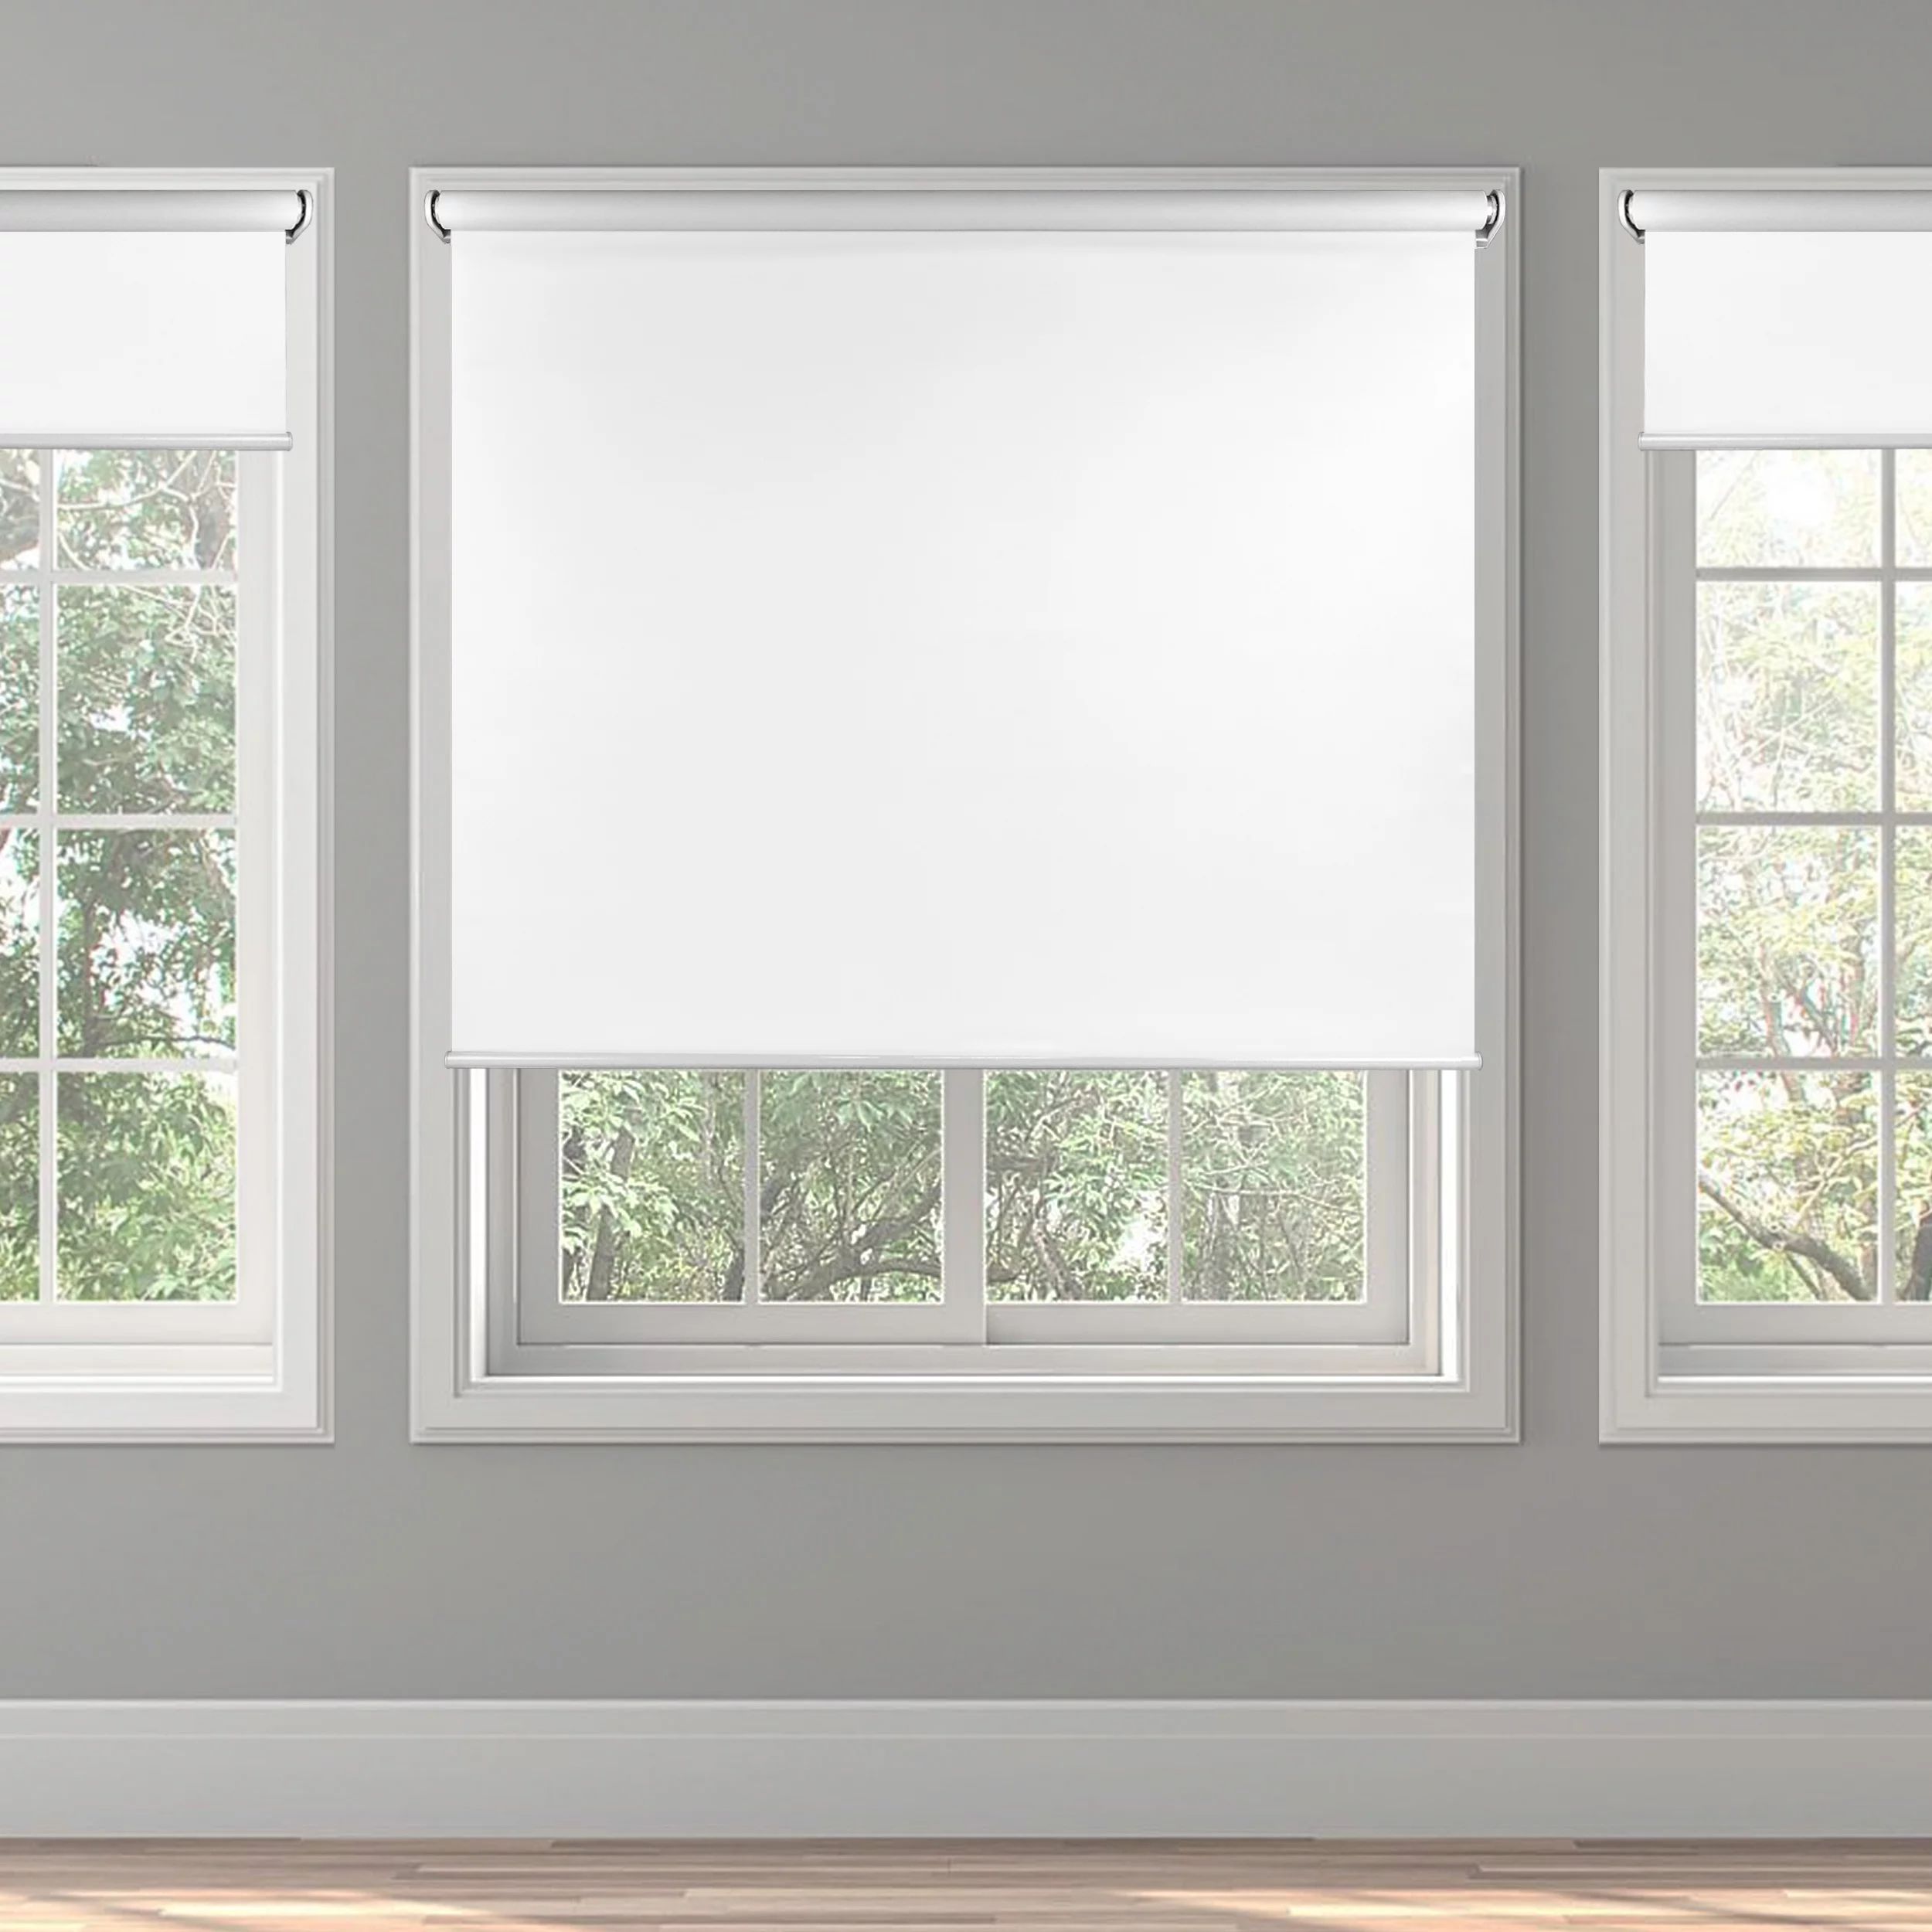 Biltek Cordless Roller Shades, Total Blackout Window Blinds, White, Easy to Install Inside or Out... | Walmart (US)